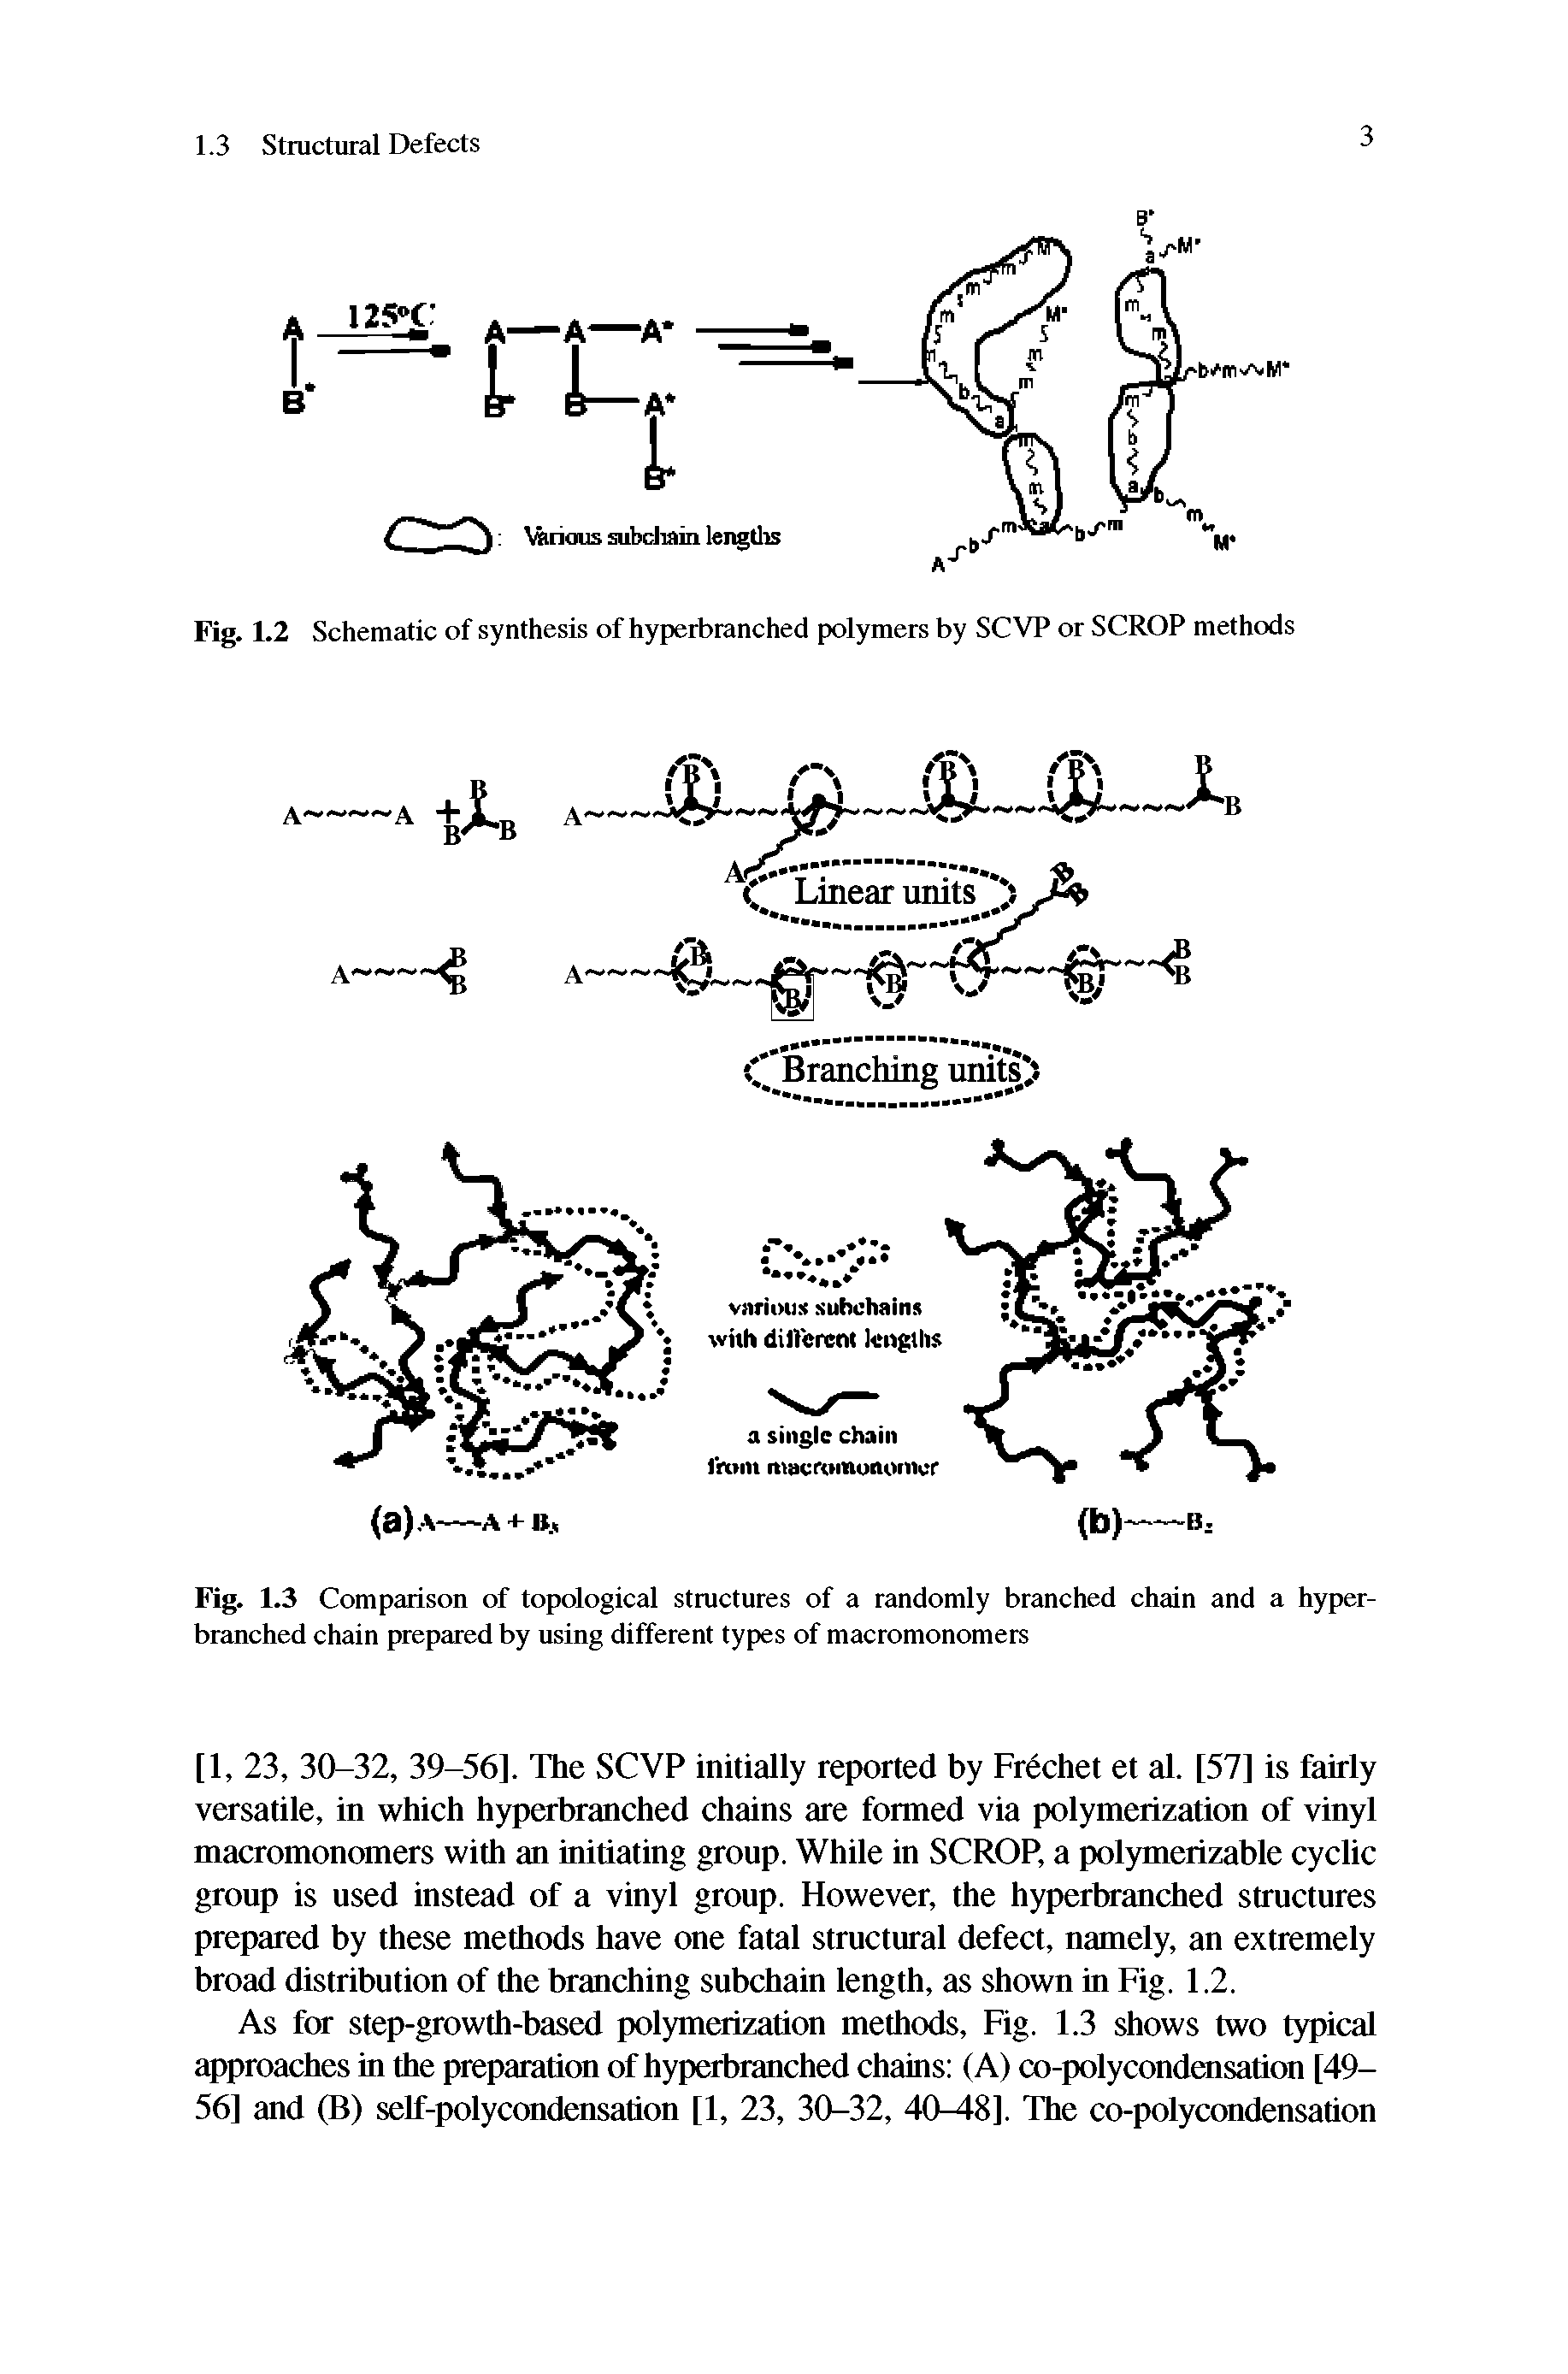 Fig. 1.3 Comparison of topological structures of a randomly branched chain and a hyperbranched chain prepared by using different types of macromonomers...